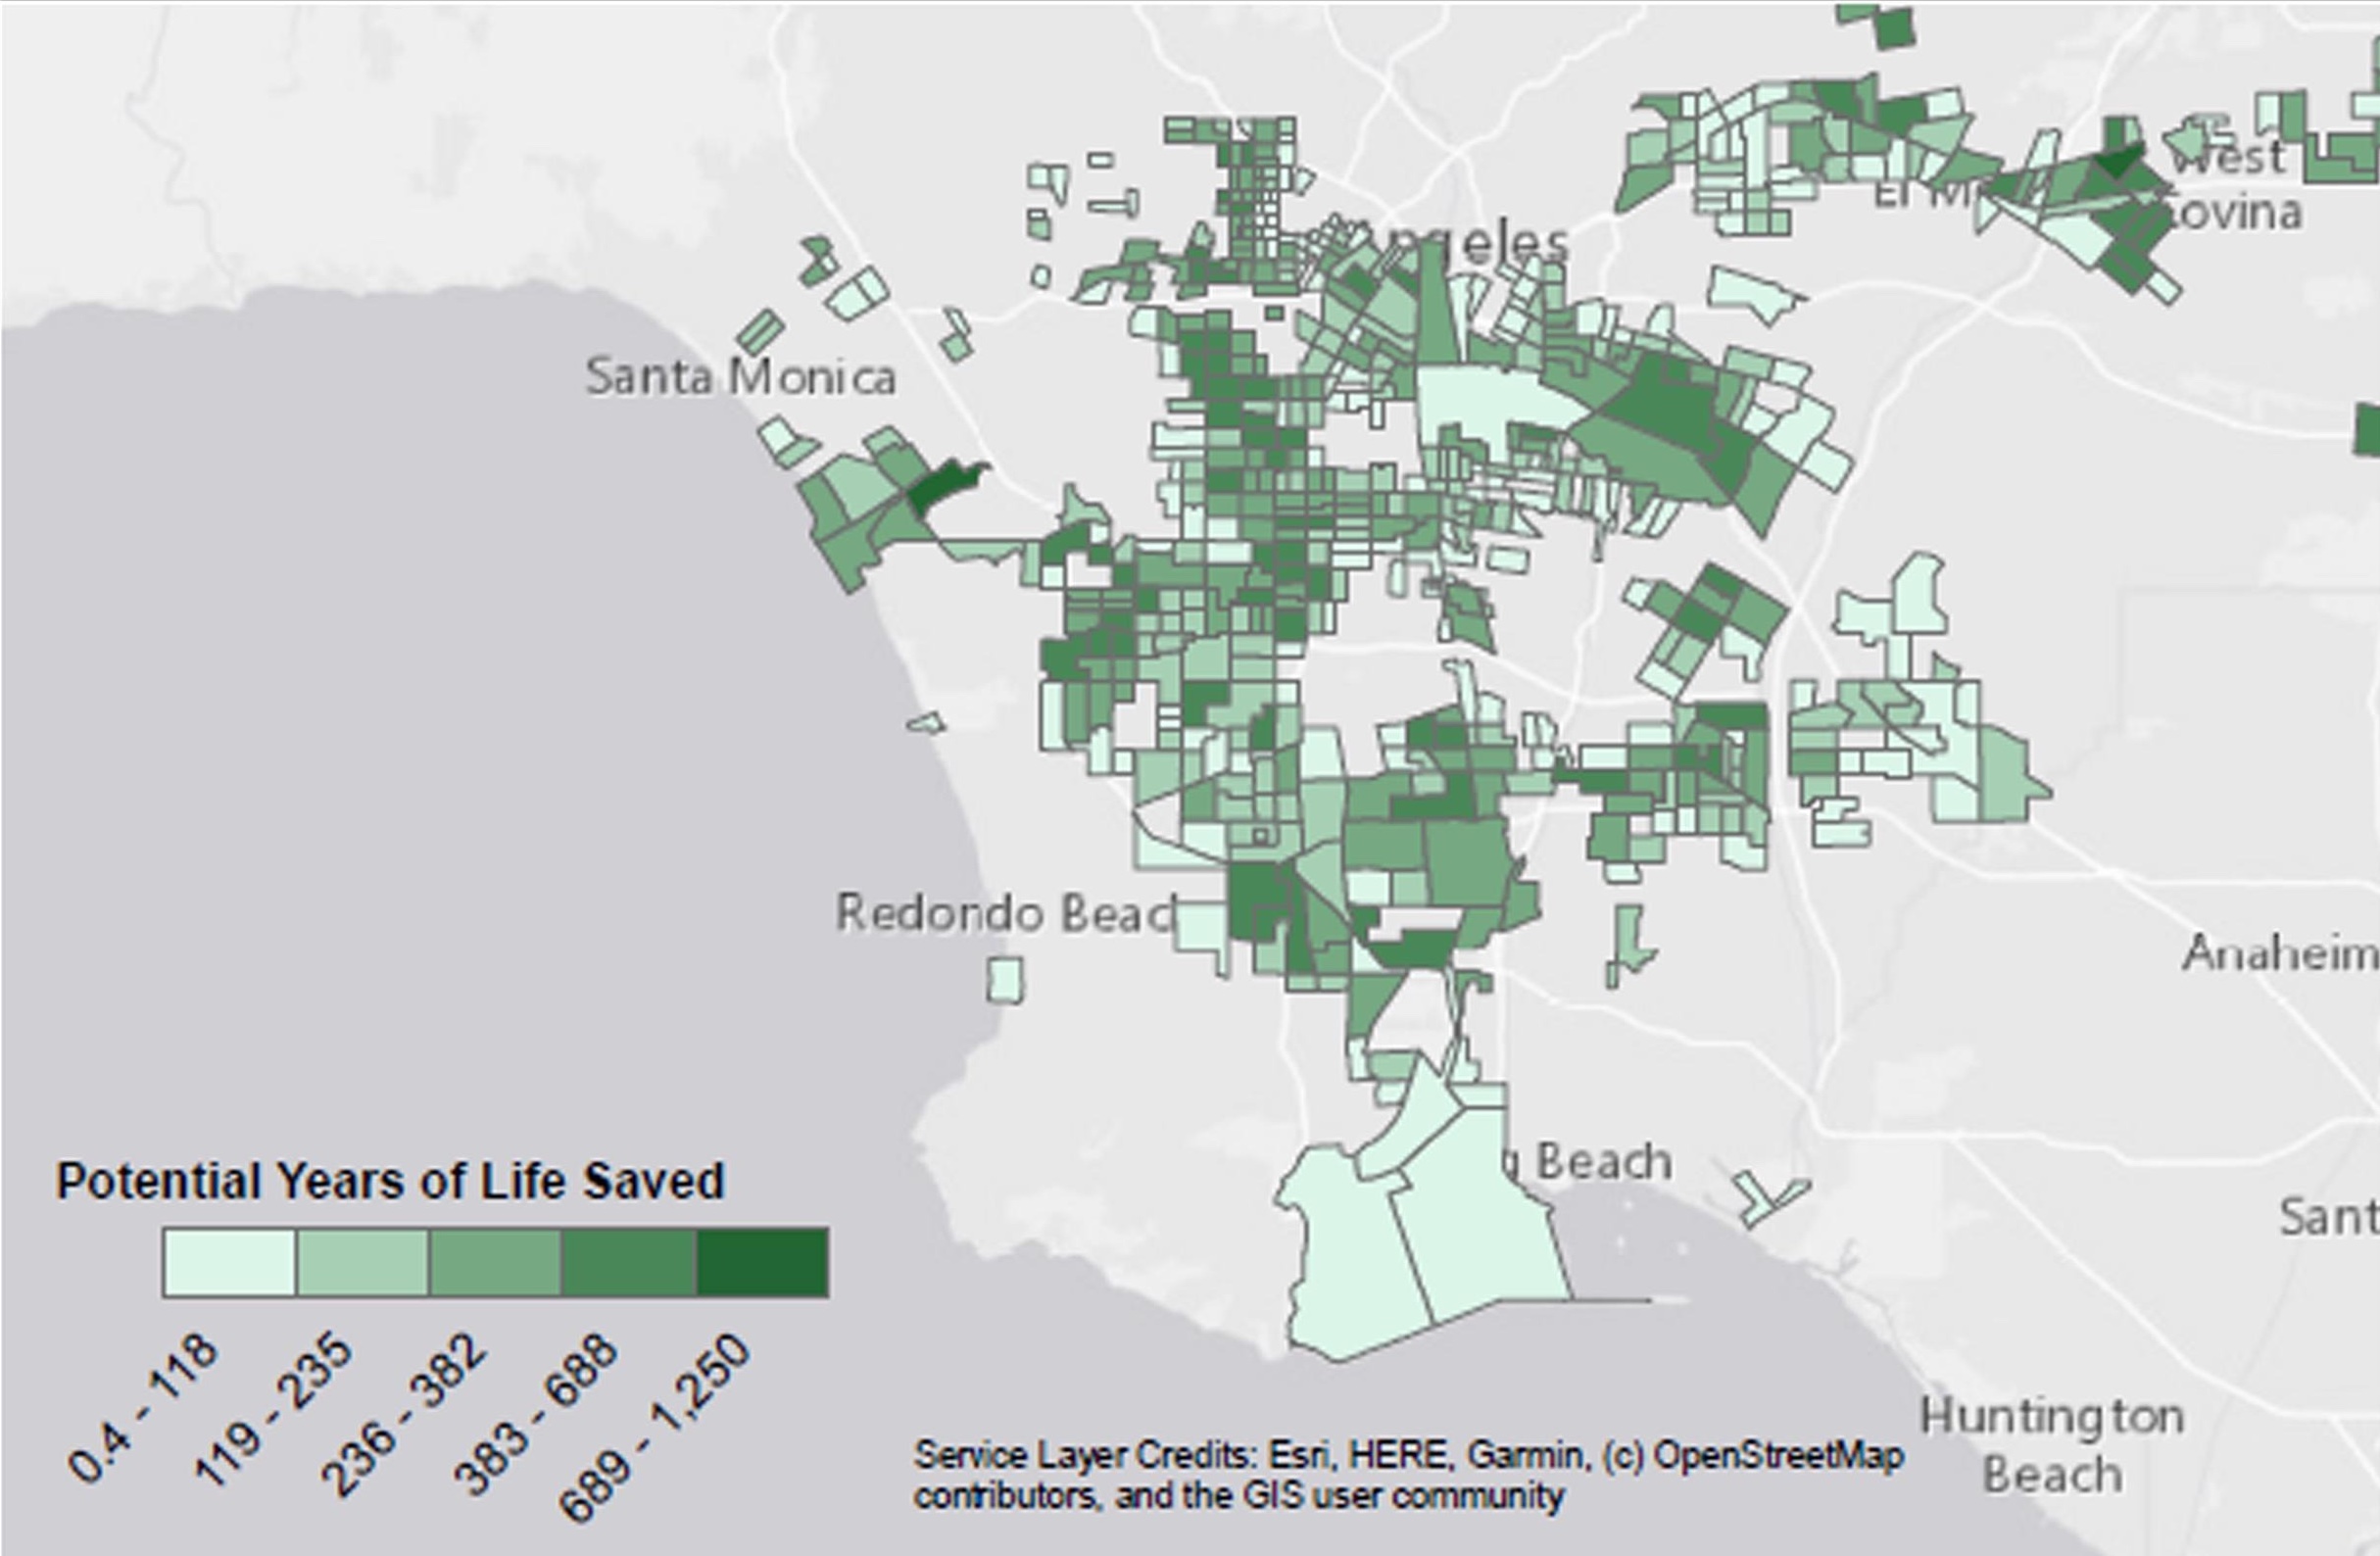 Potential years of life saved from added park space in greenness-deprived census tracts in the southern portion of Los Angeles County.